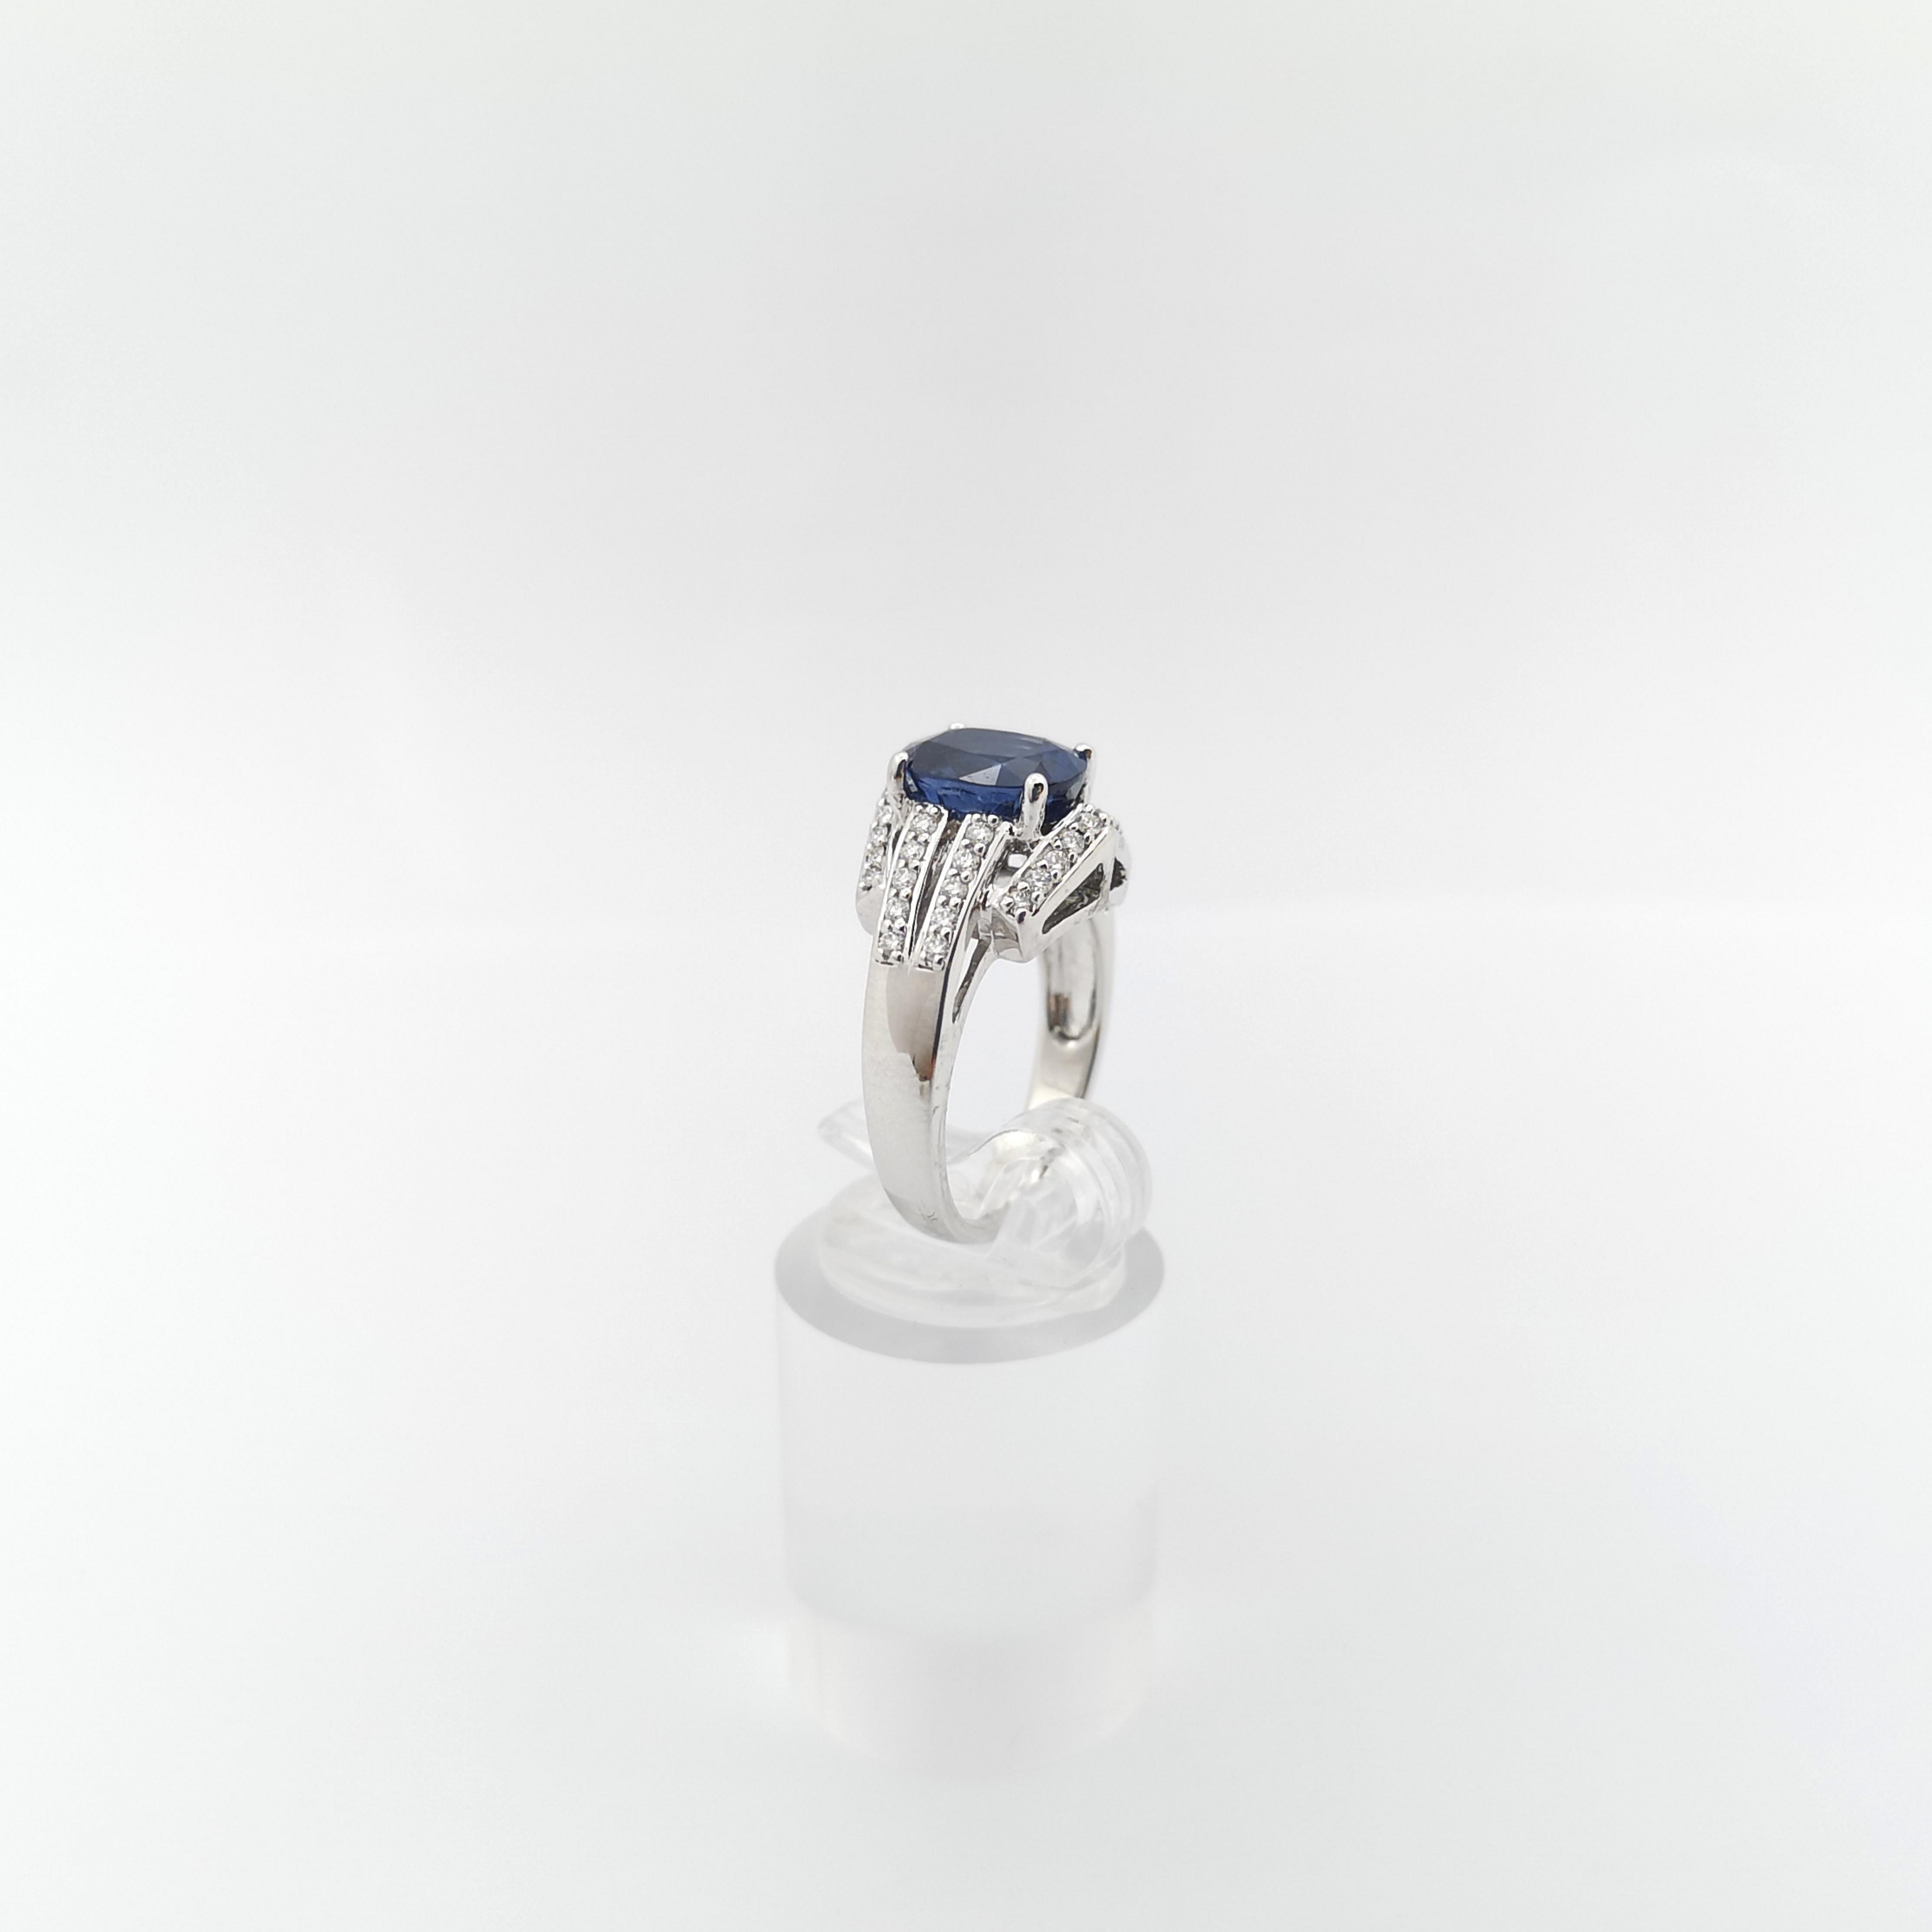 Blue Sapphire with Diamond Ring set in 18K White Gold Settings For Sale 6